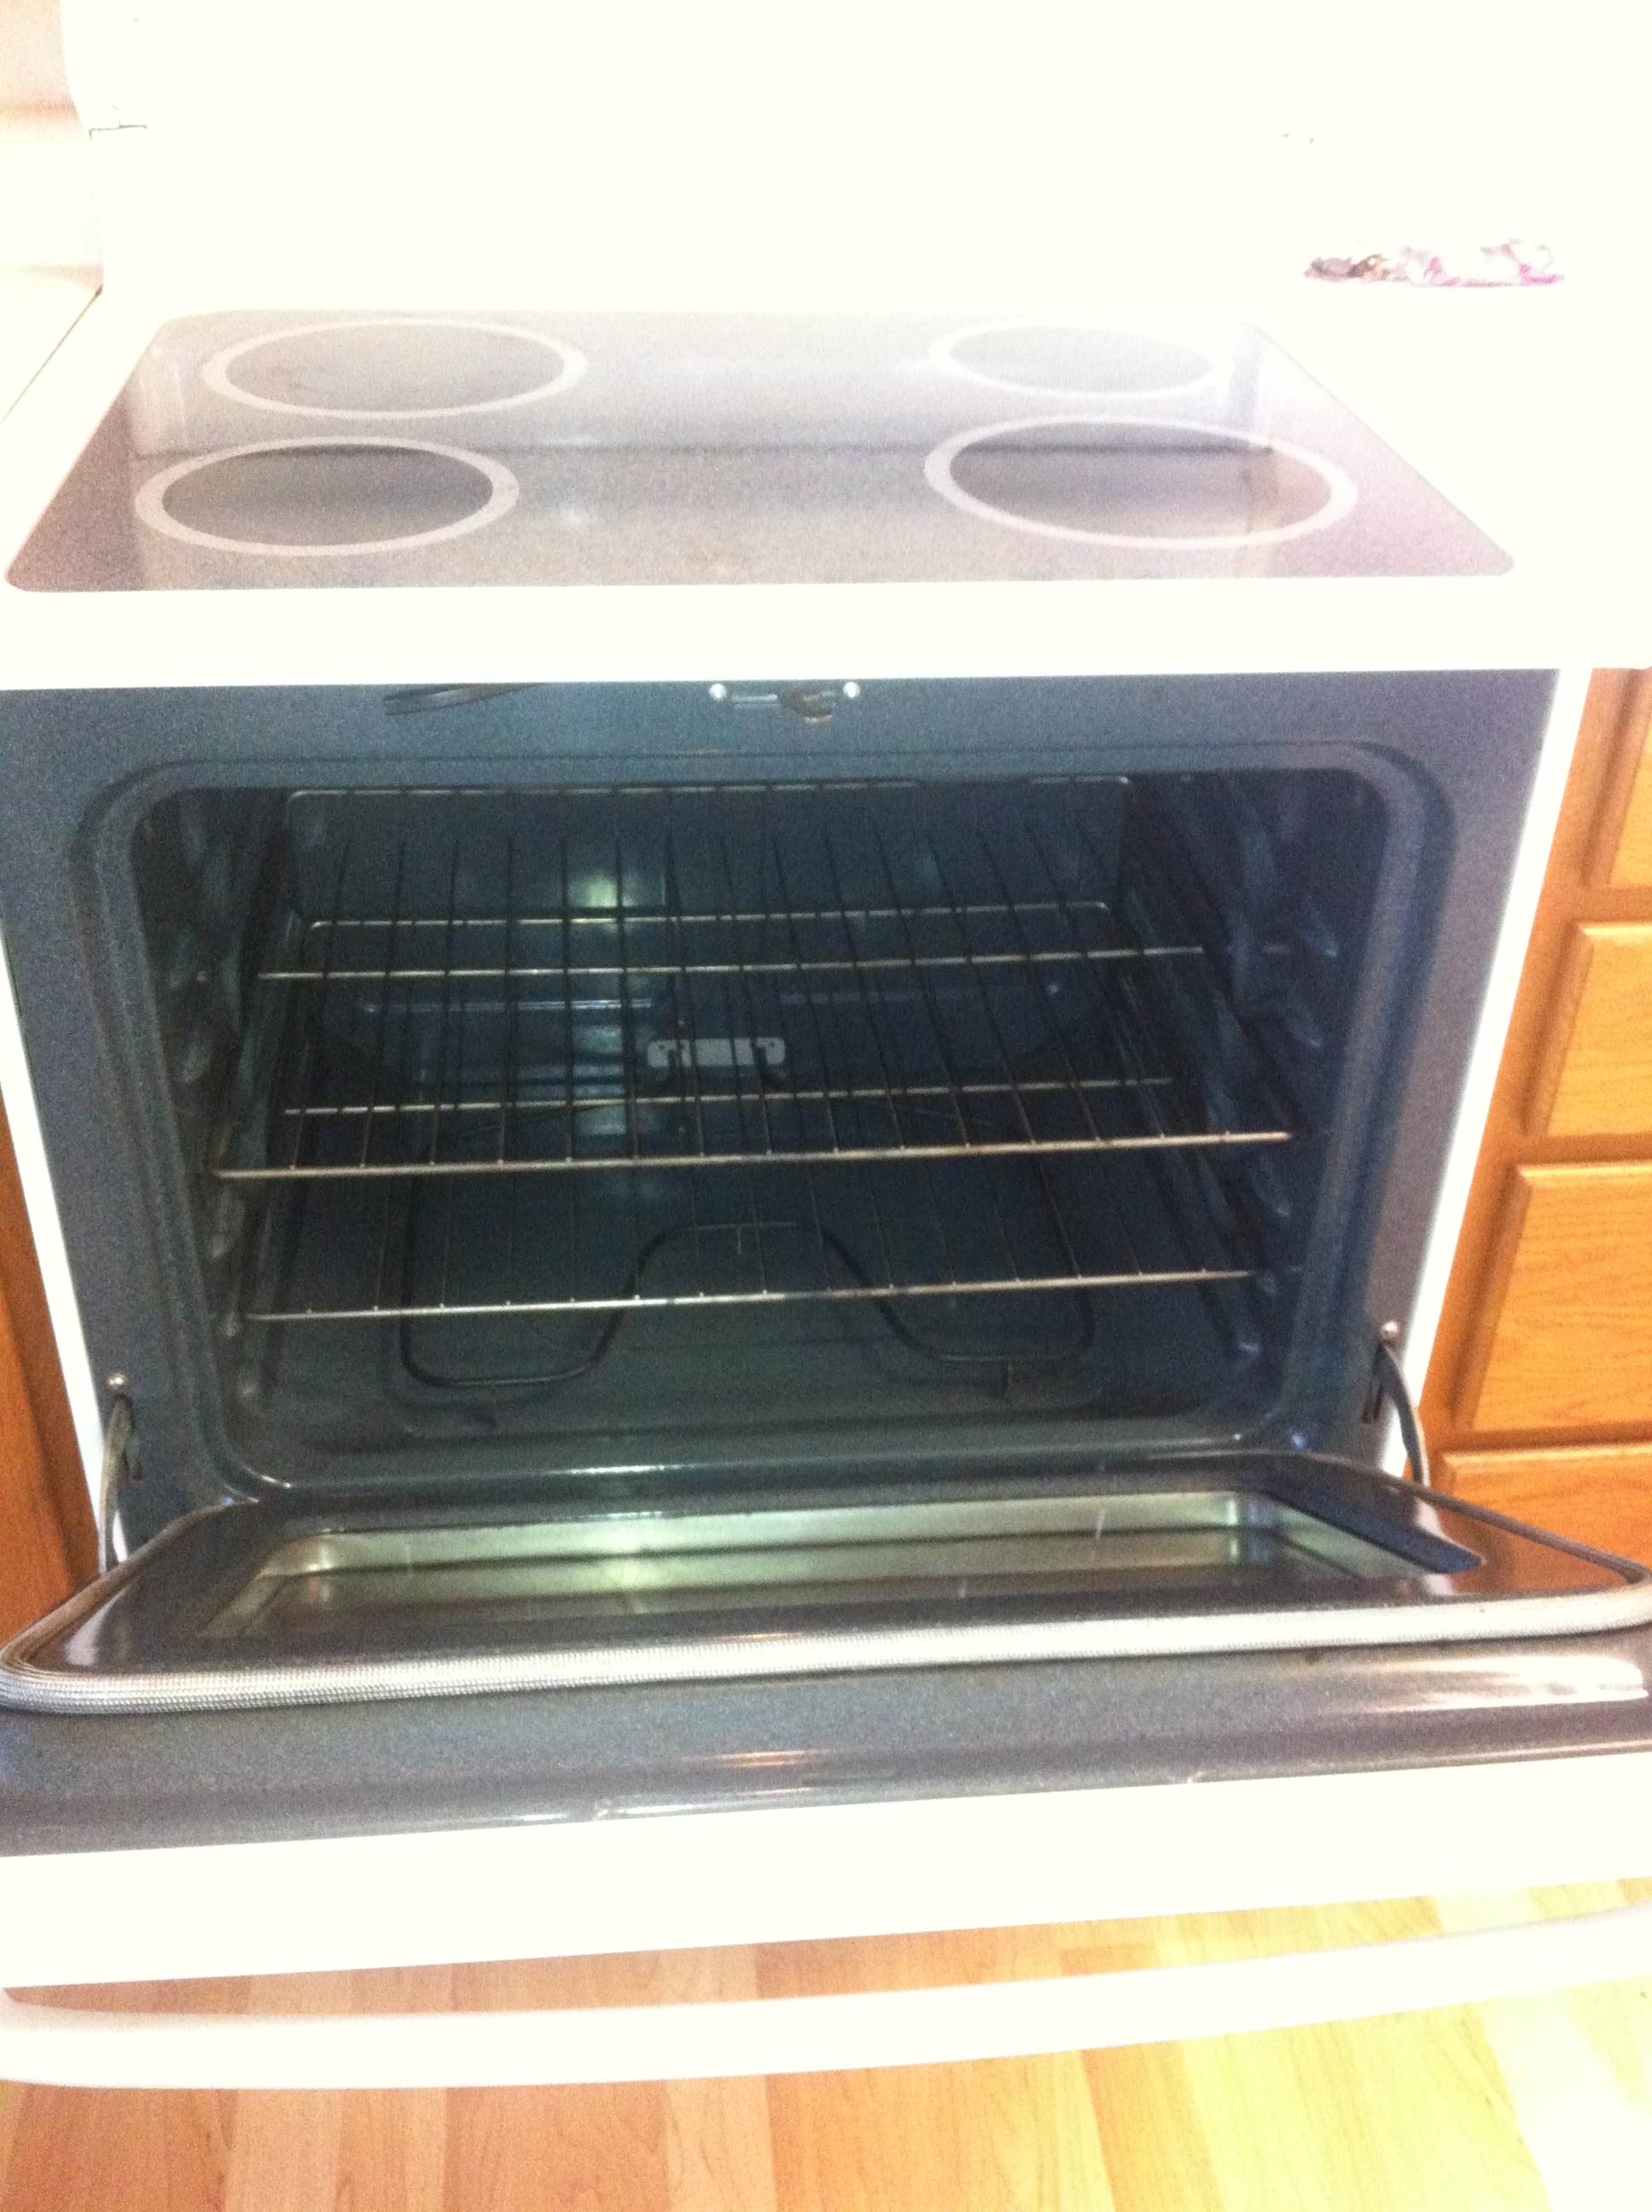  Prevent that burning smell when you cook by keeping your oven clean- we’ll help! 